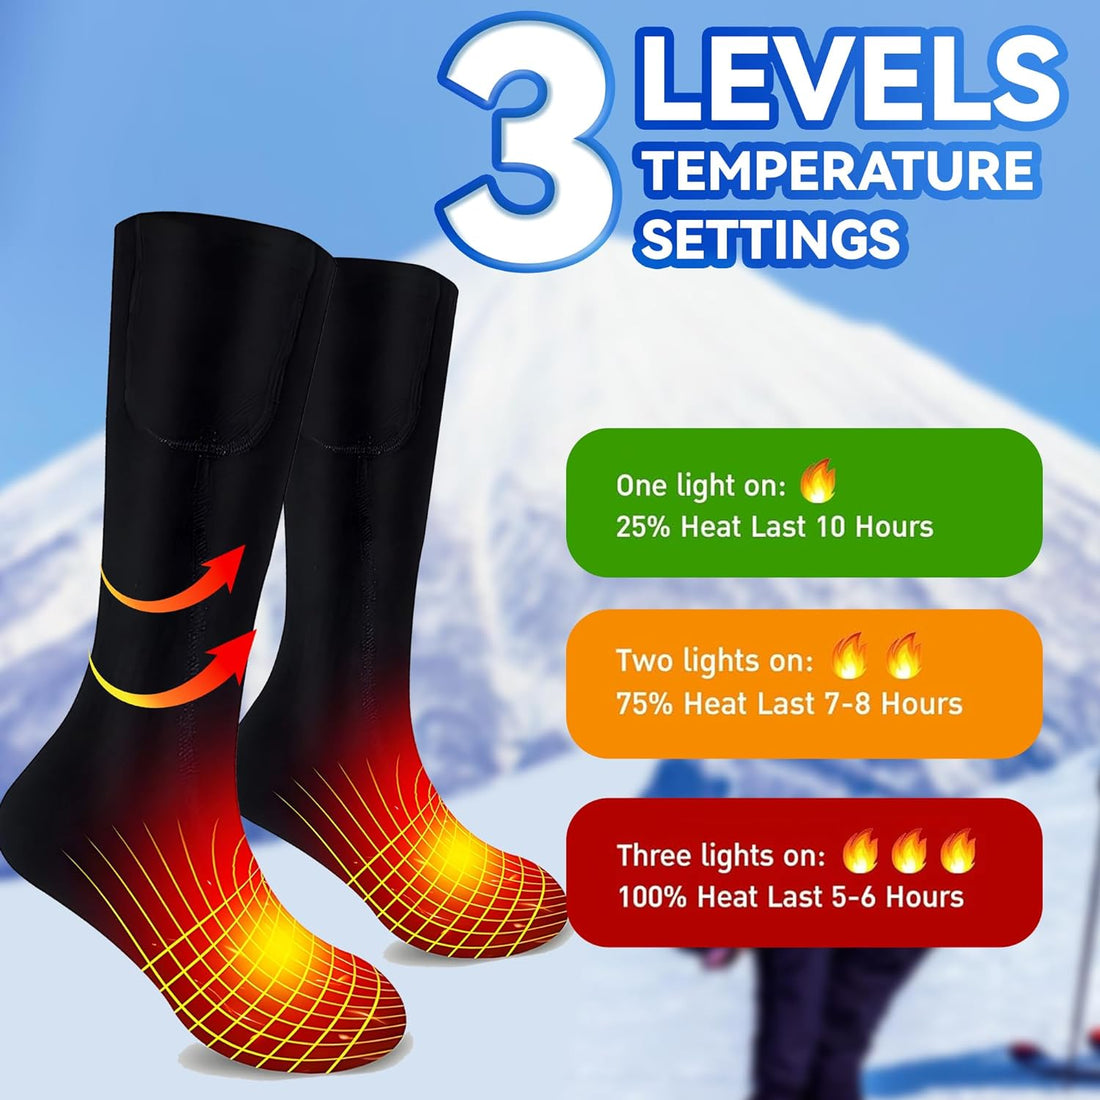 Heated Socks for Men Women, 6000mAh Rechargeable Heated Socks with 3 Heat Settings, Electric Heated Socks Foot Warmer Thermal Socks for Camping, Skiing, Hiking, Hunting, Winter Sports Outdoor & Indoor